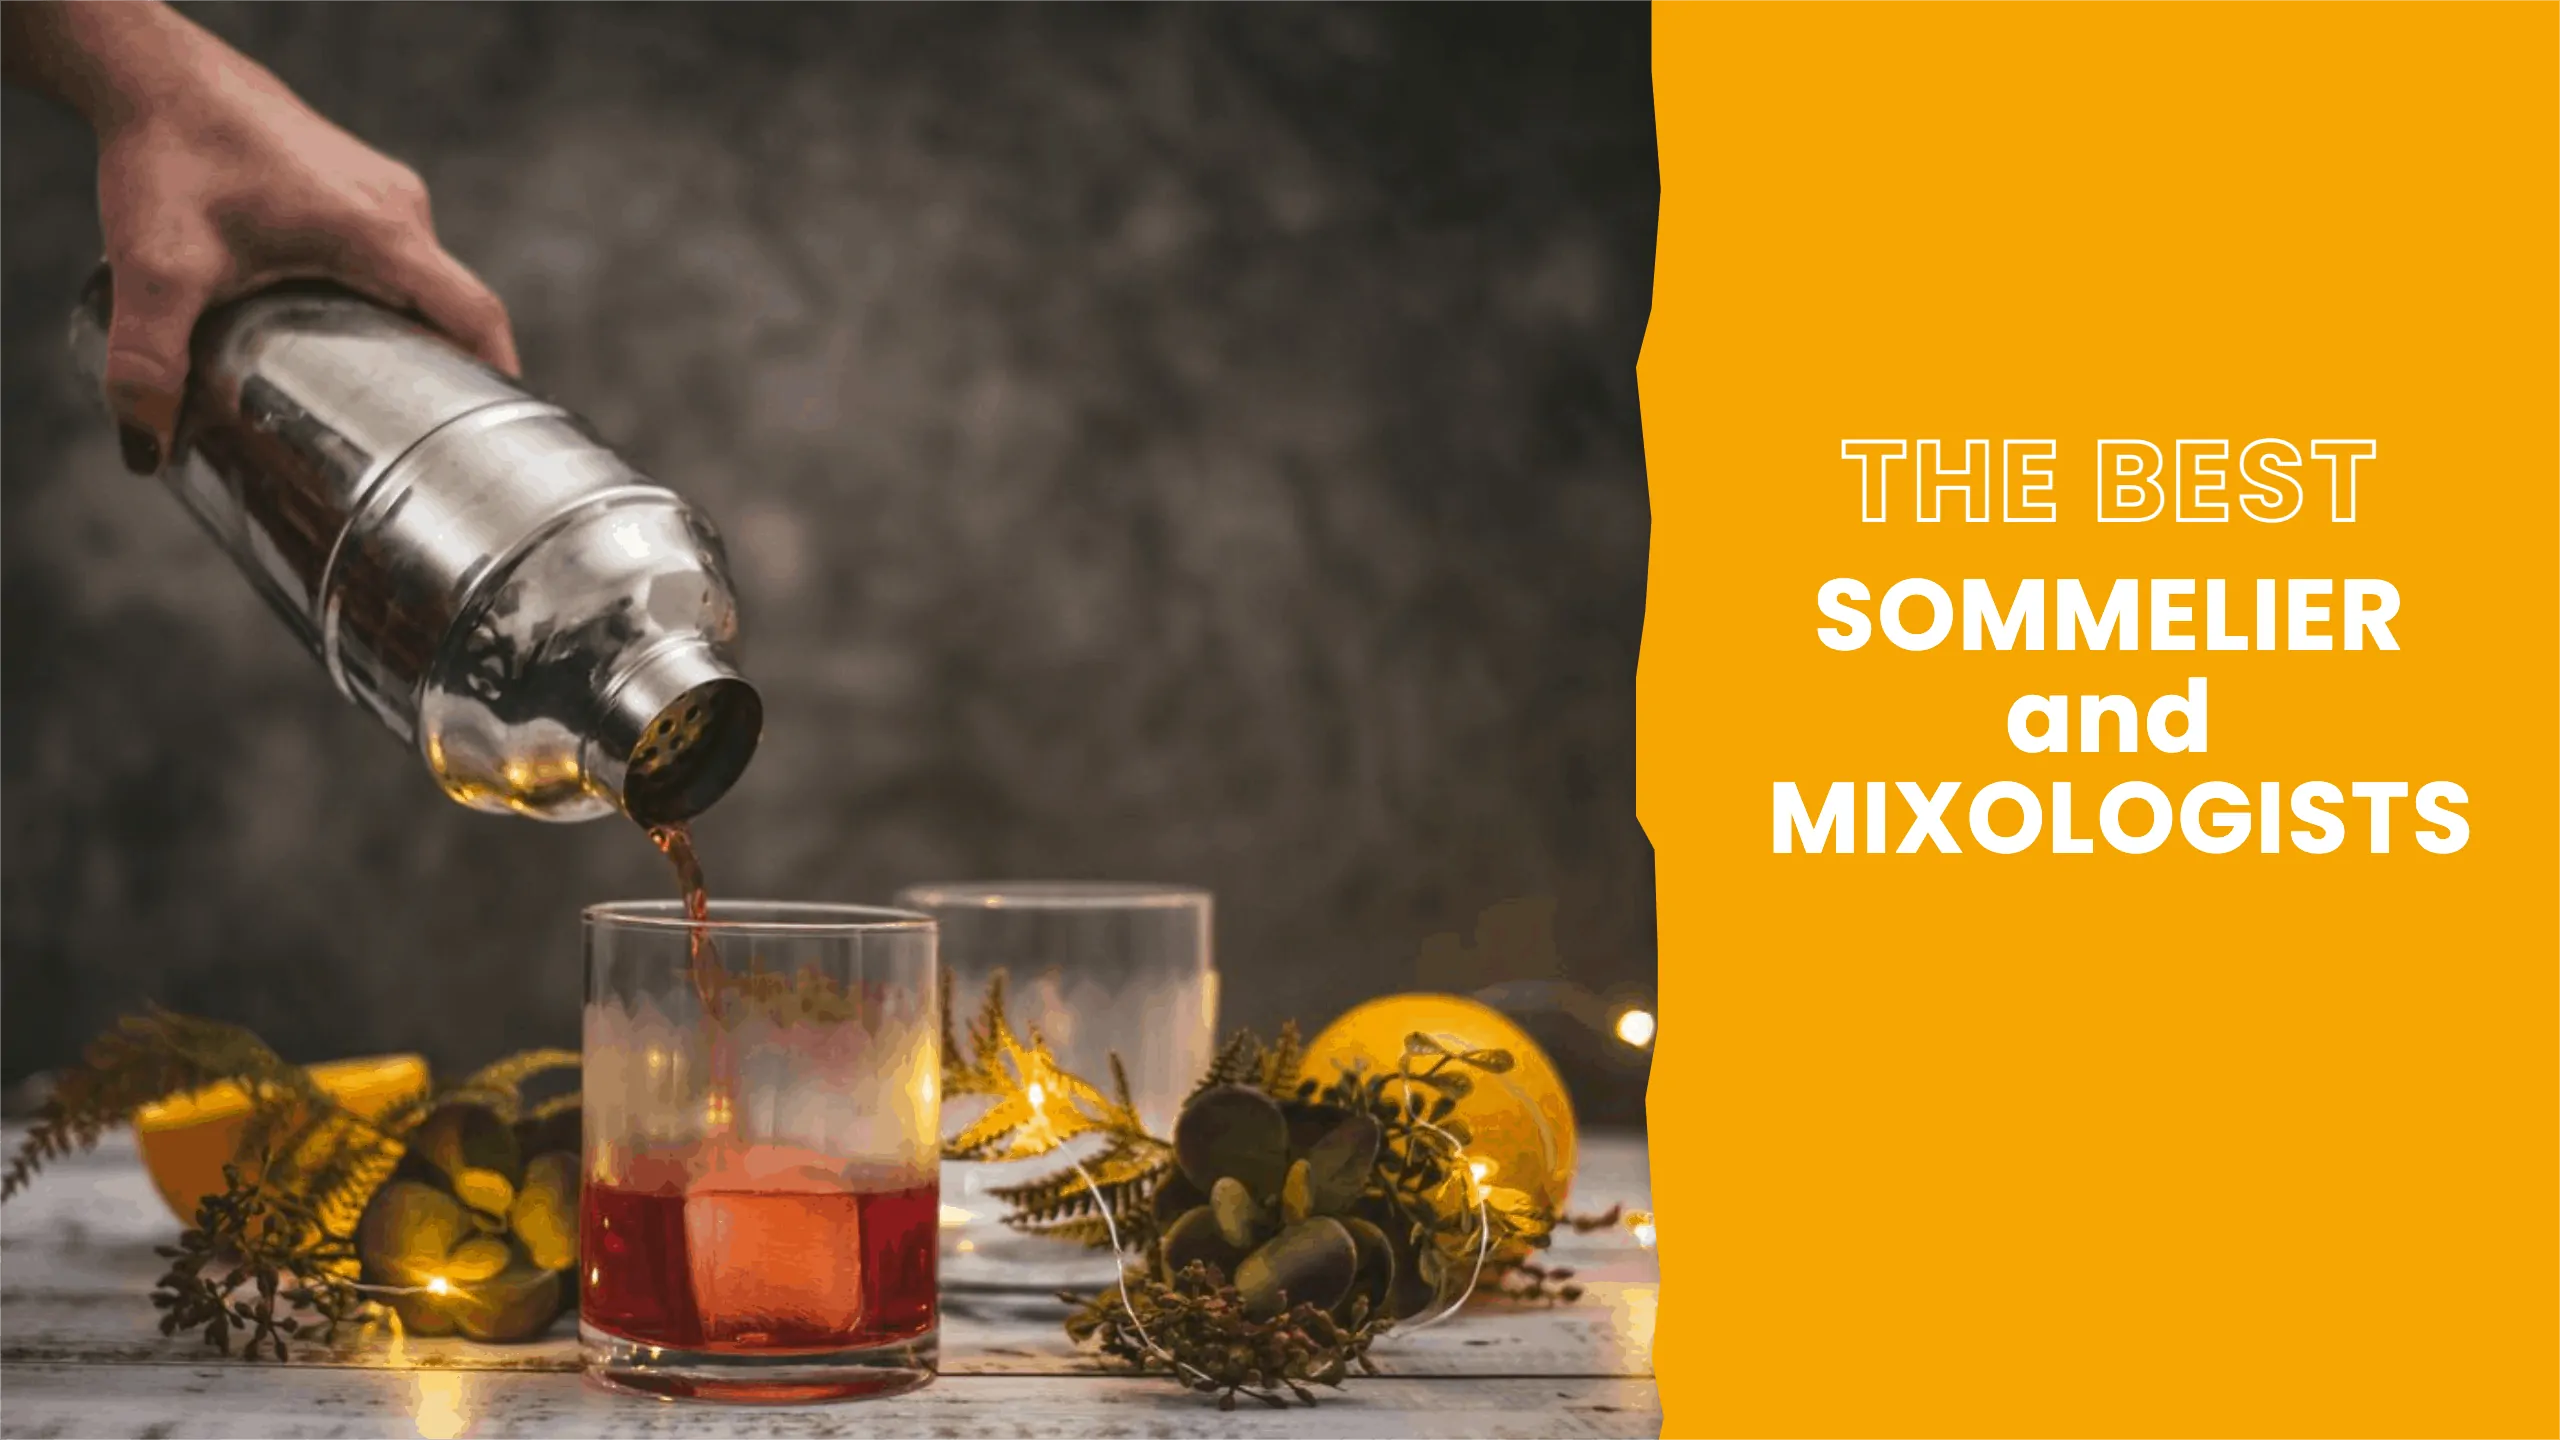 Hire the Best Sommelier and Mixologist for your Virtual Beverage Making